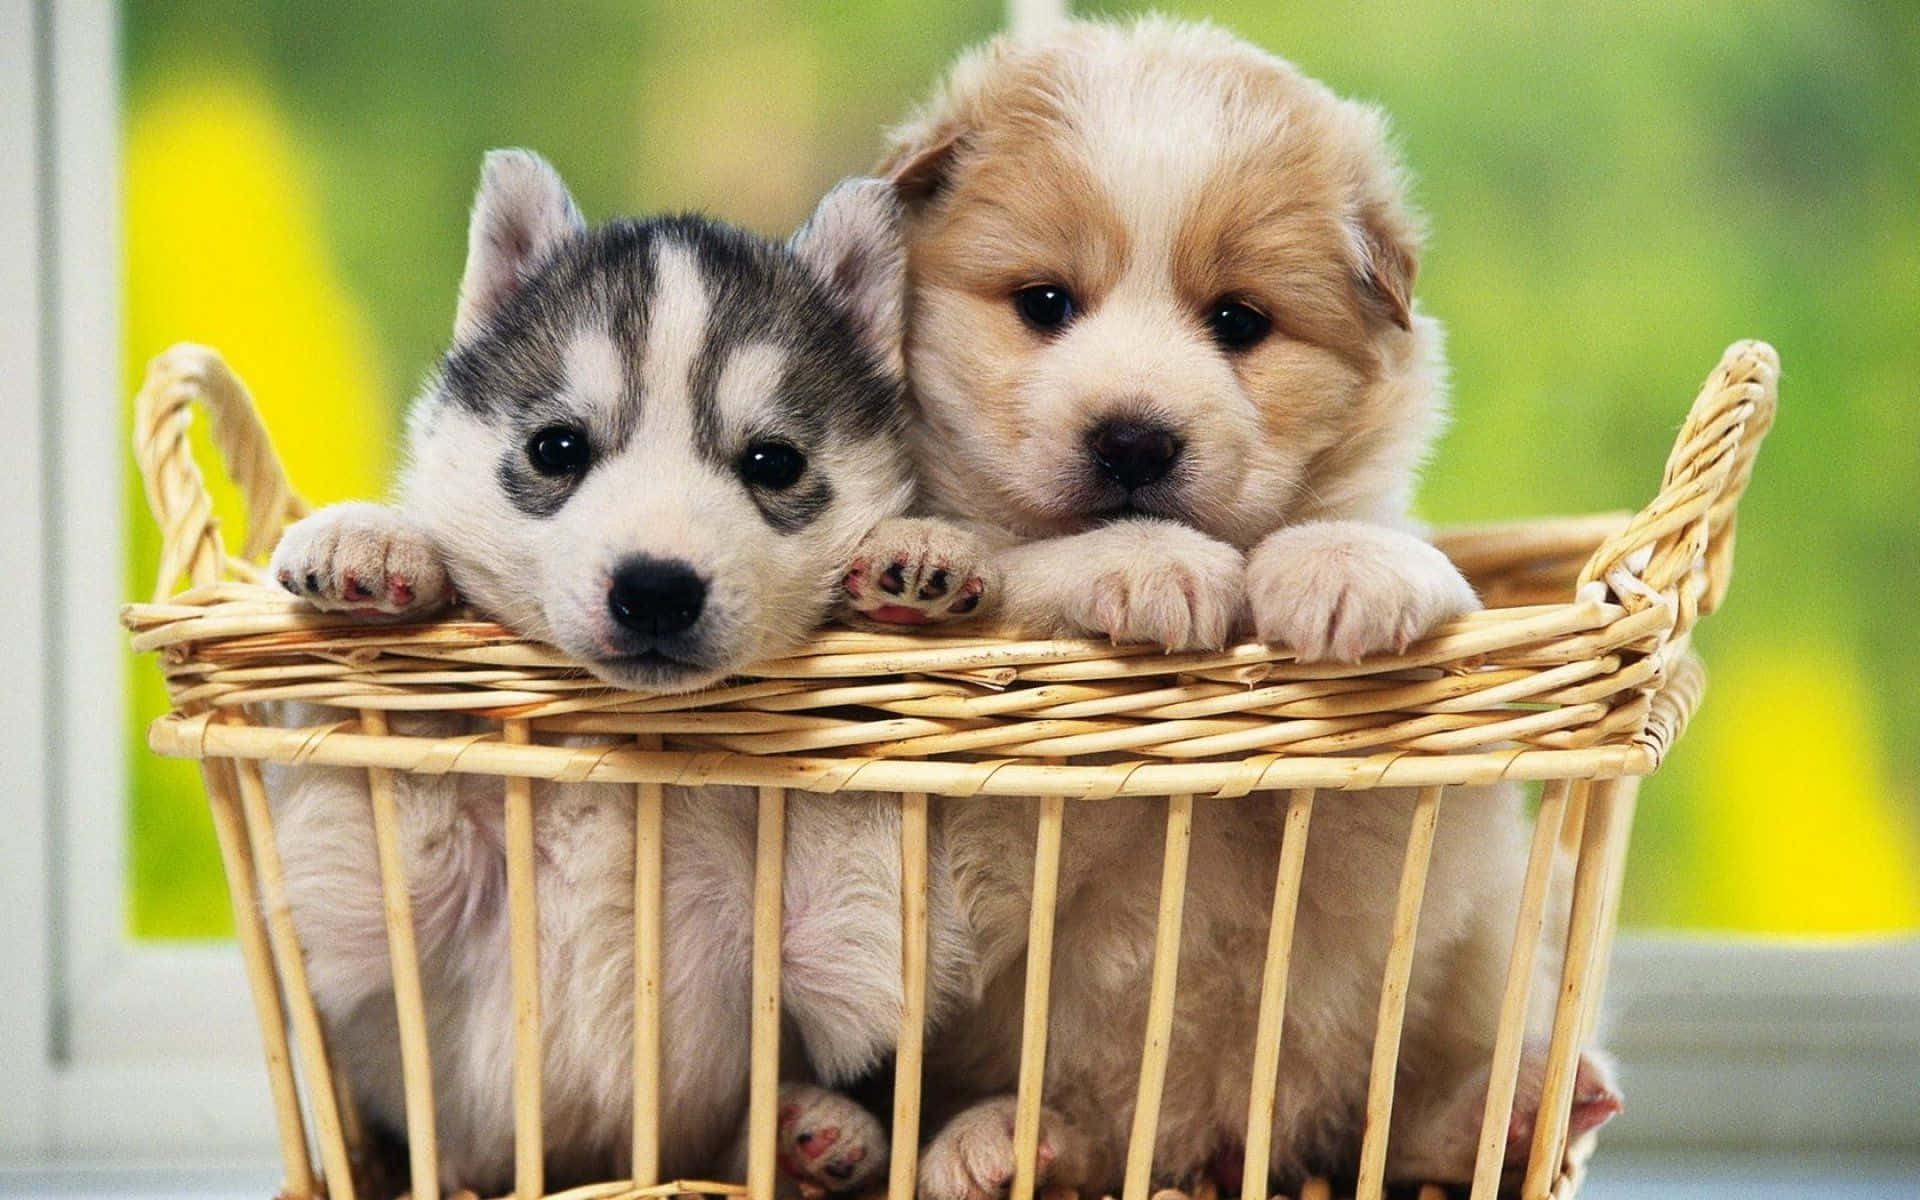 Feel the love with this adorable pup duo!